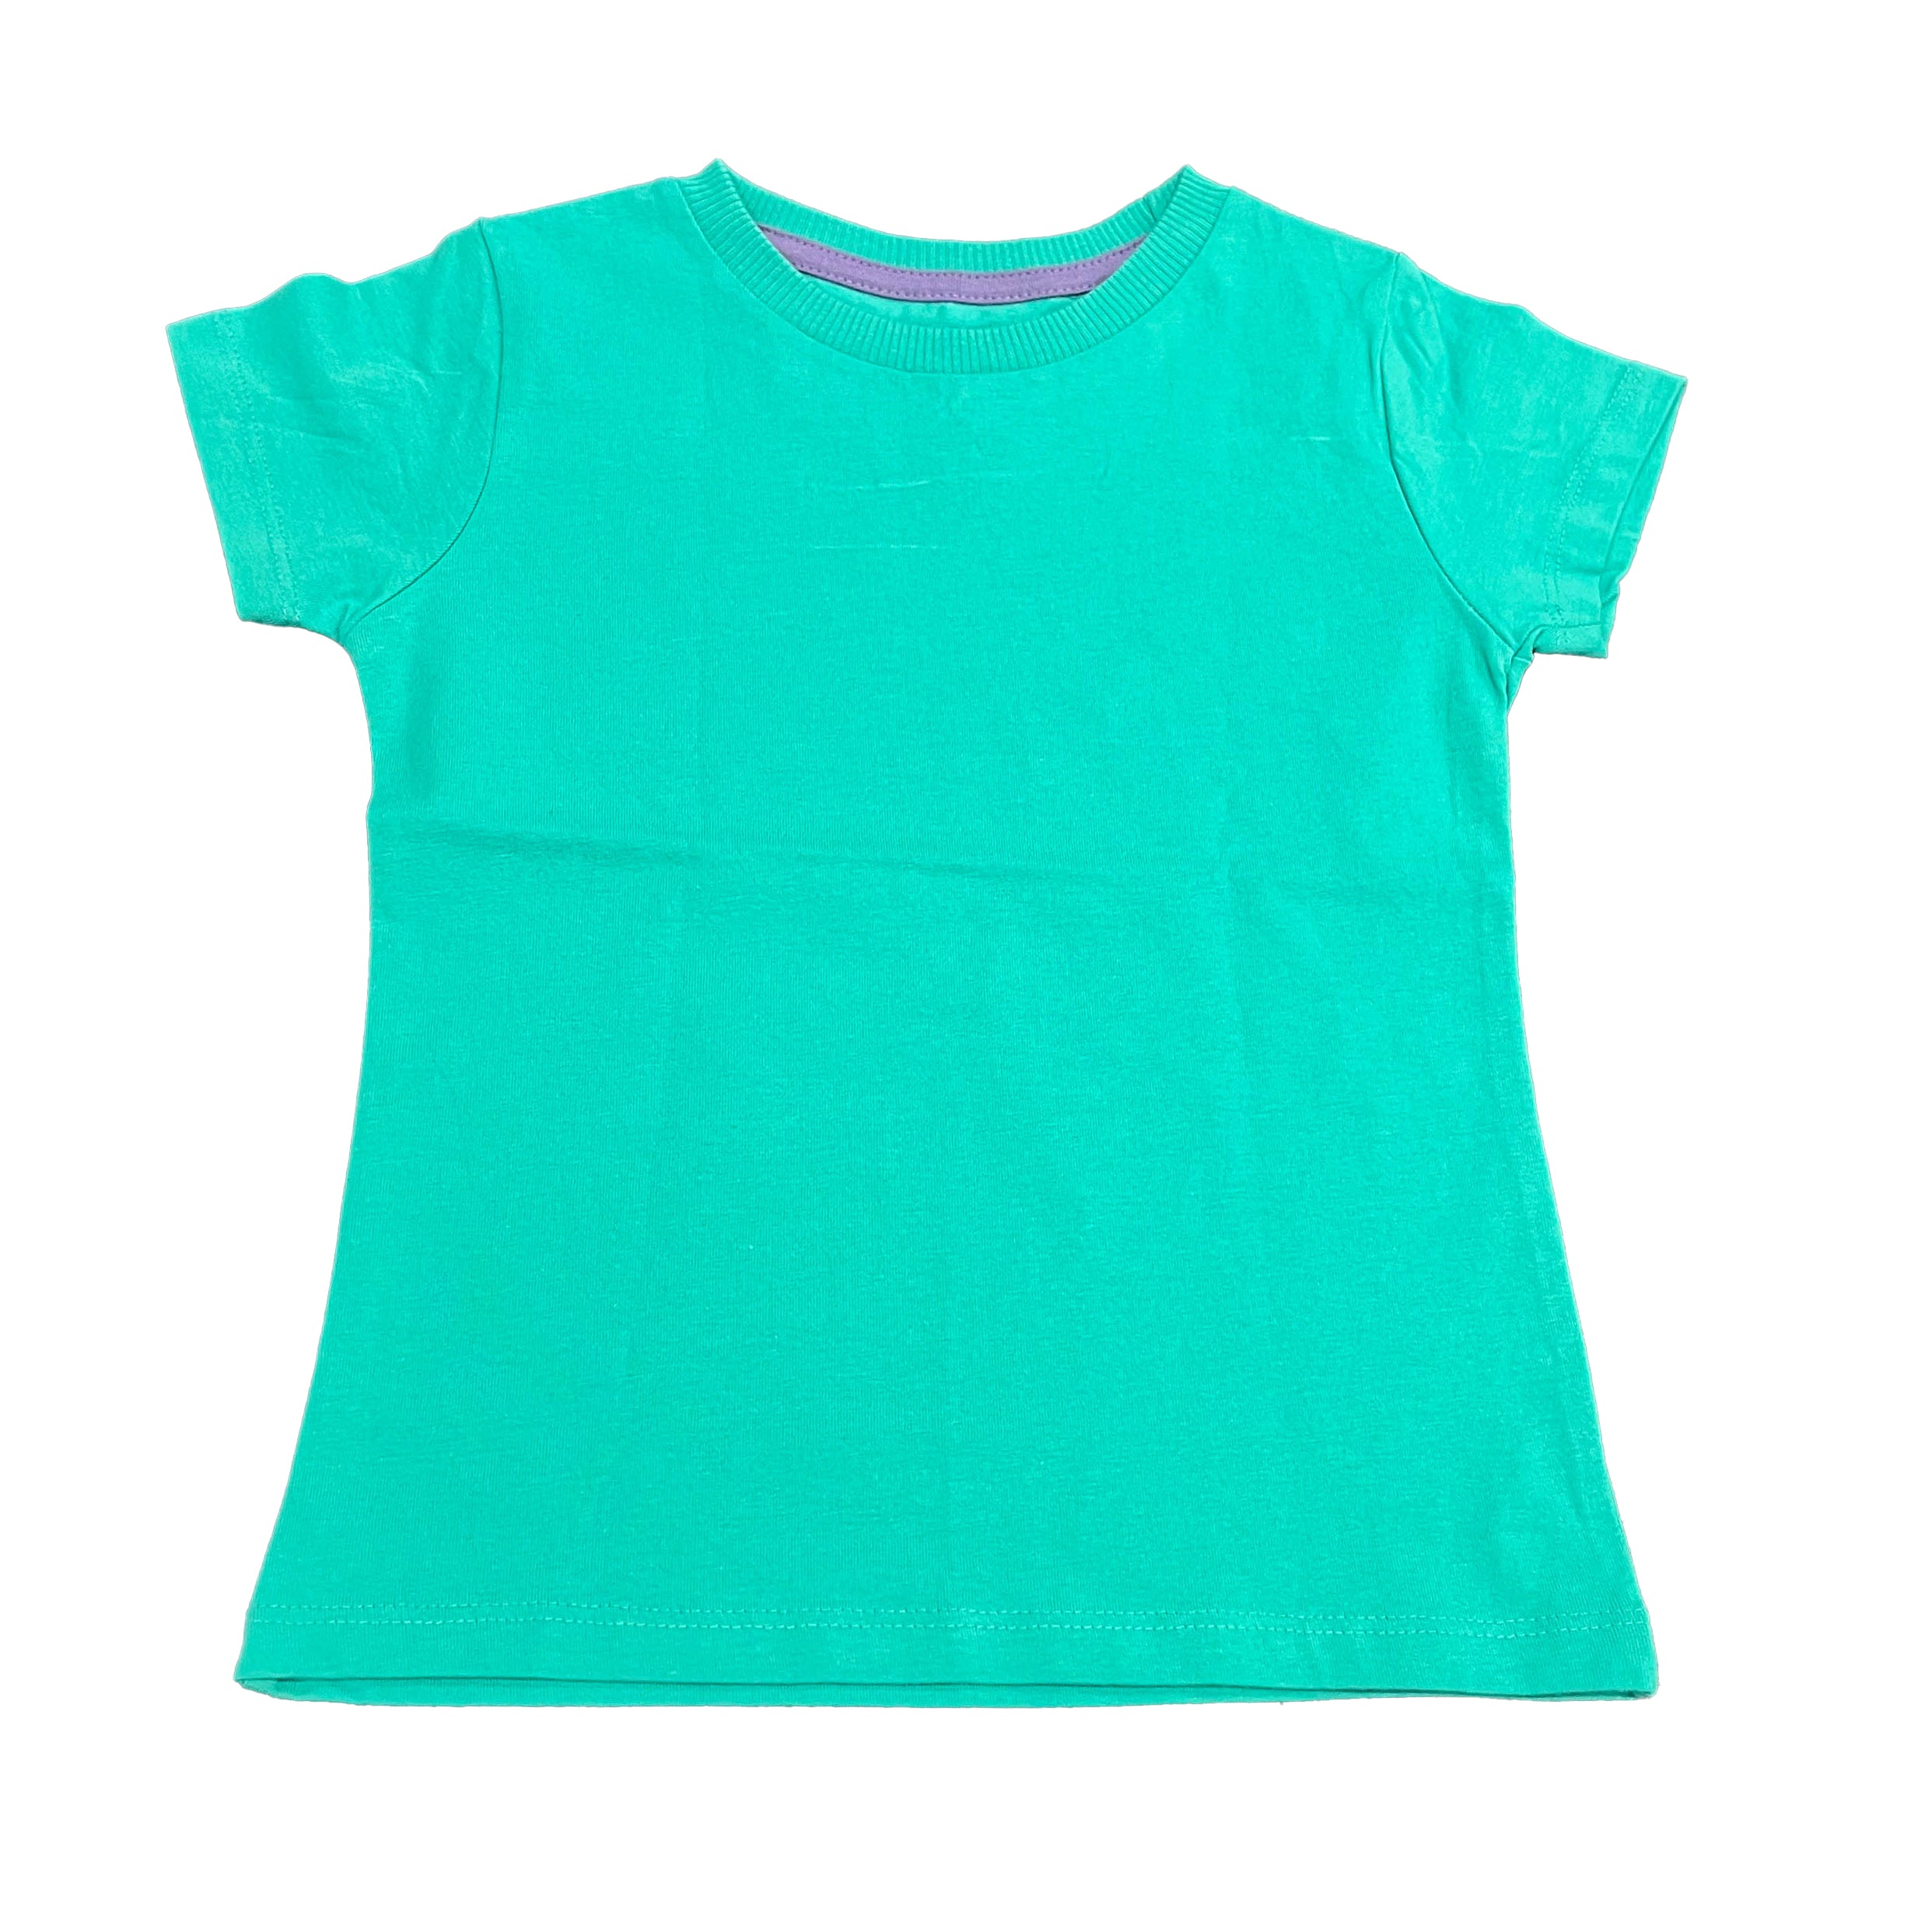 Pre-owned Turquoise T-Shirt size: 3T